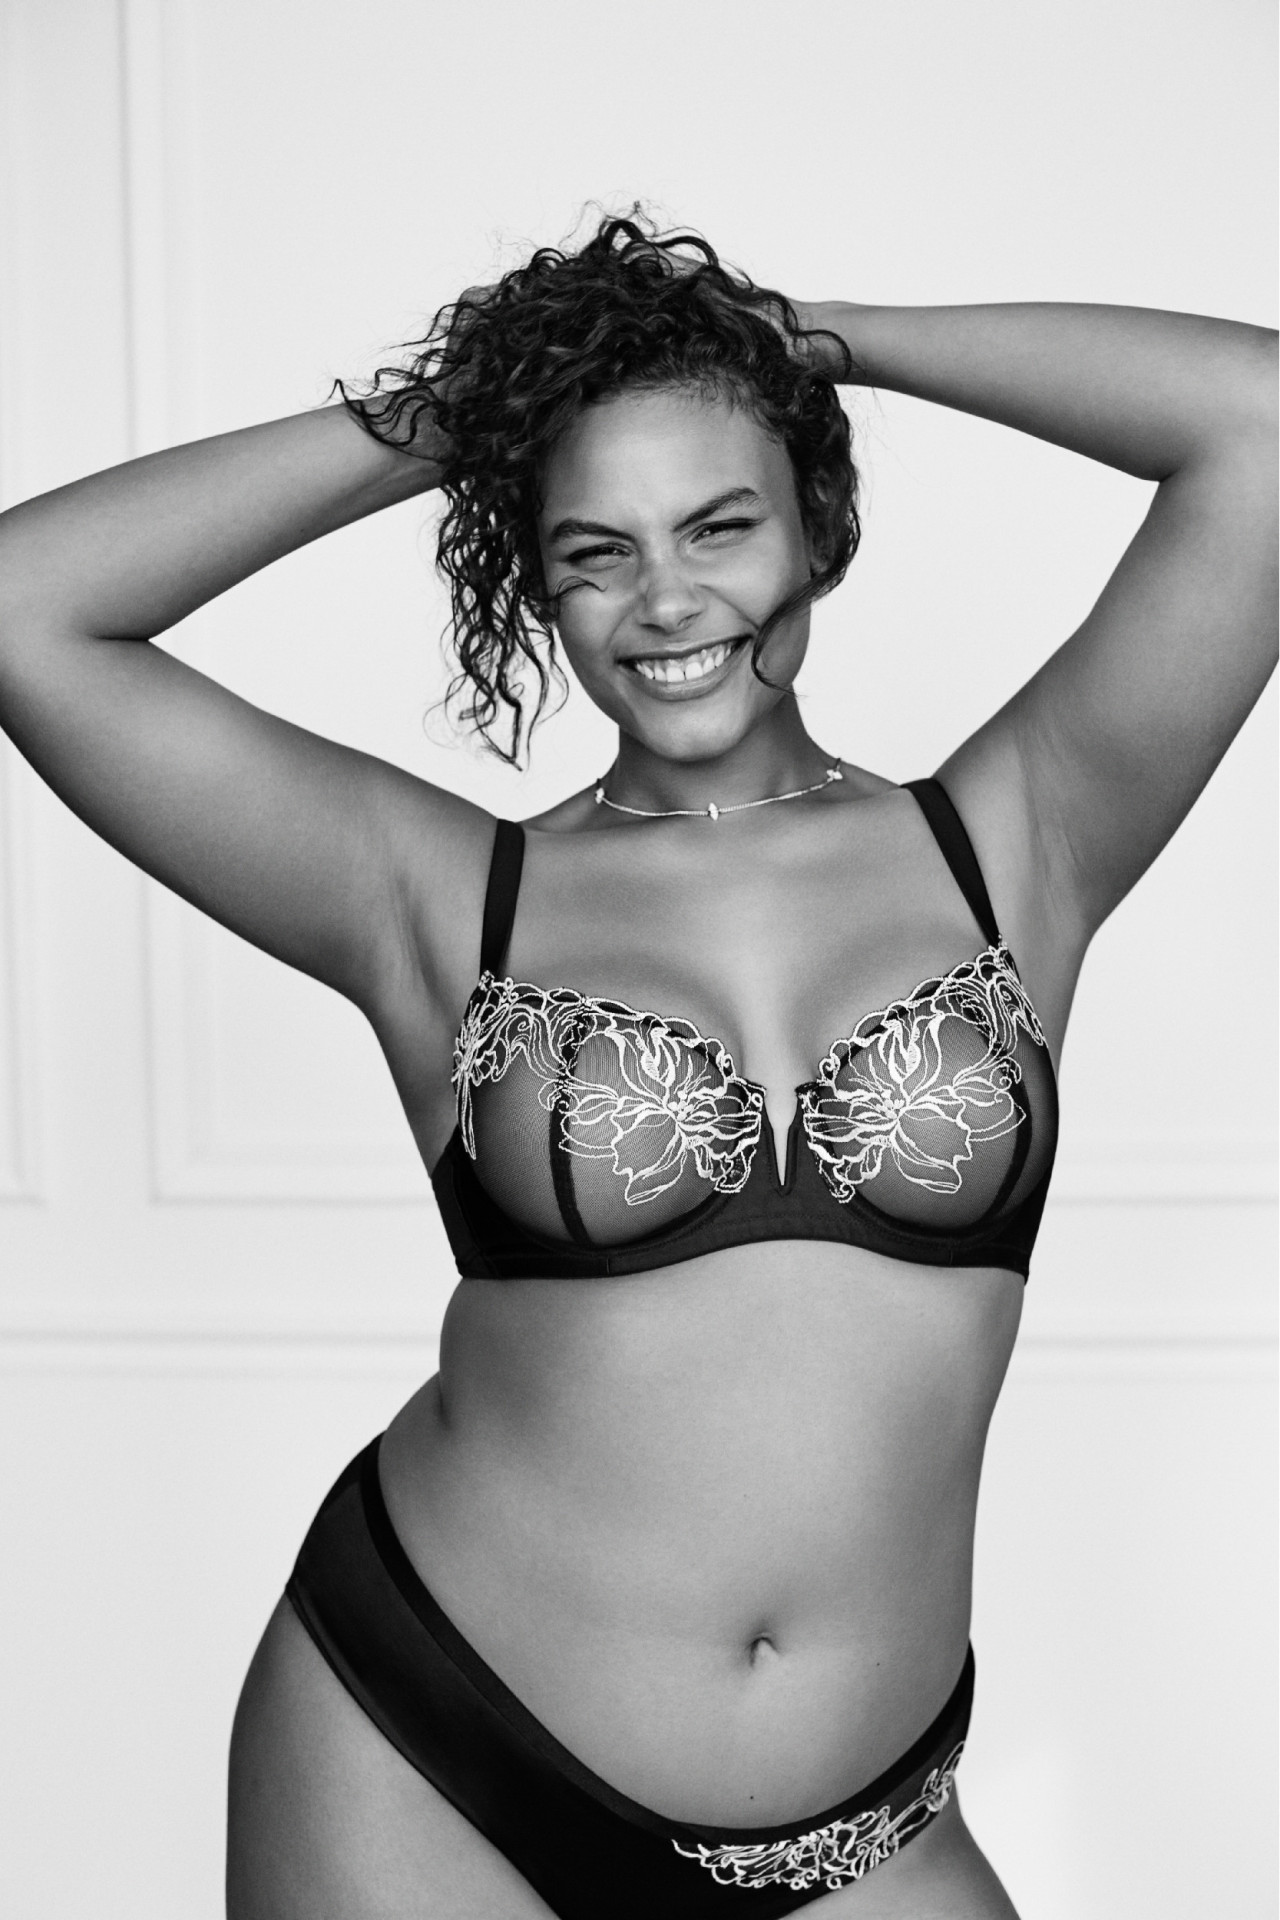 Lane Bryant — The women who wear Cacique know that sexy comes in